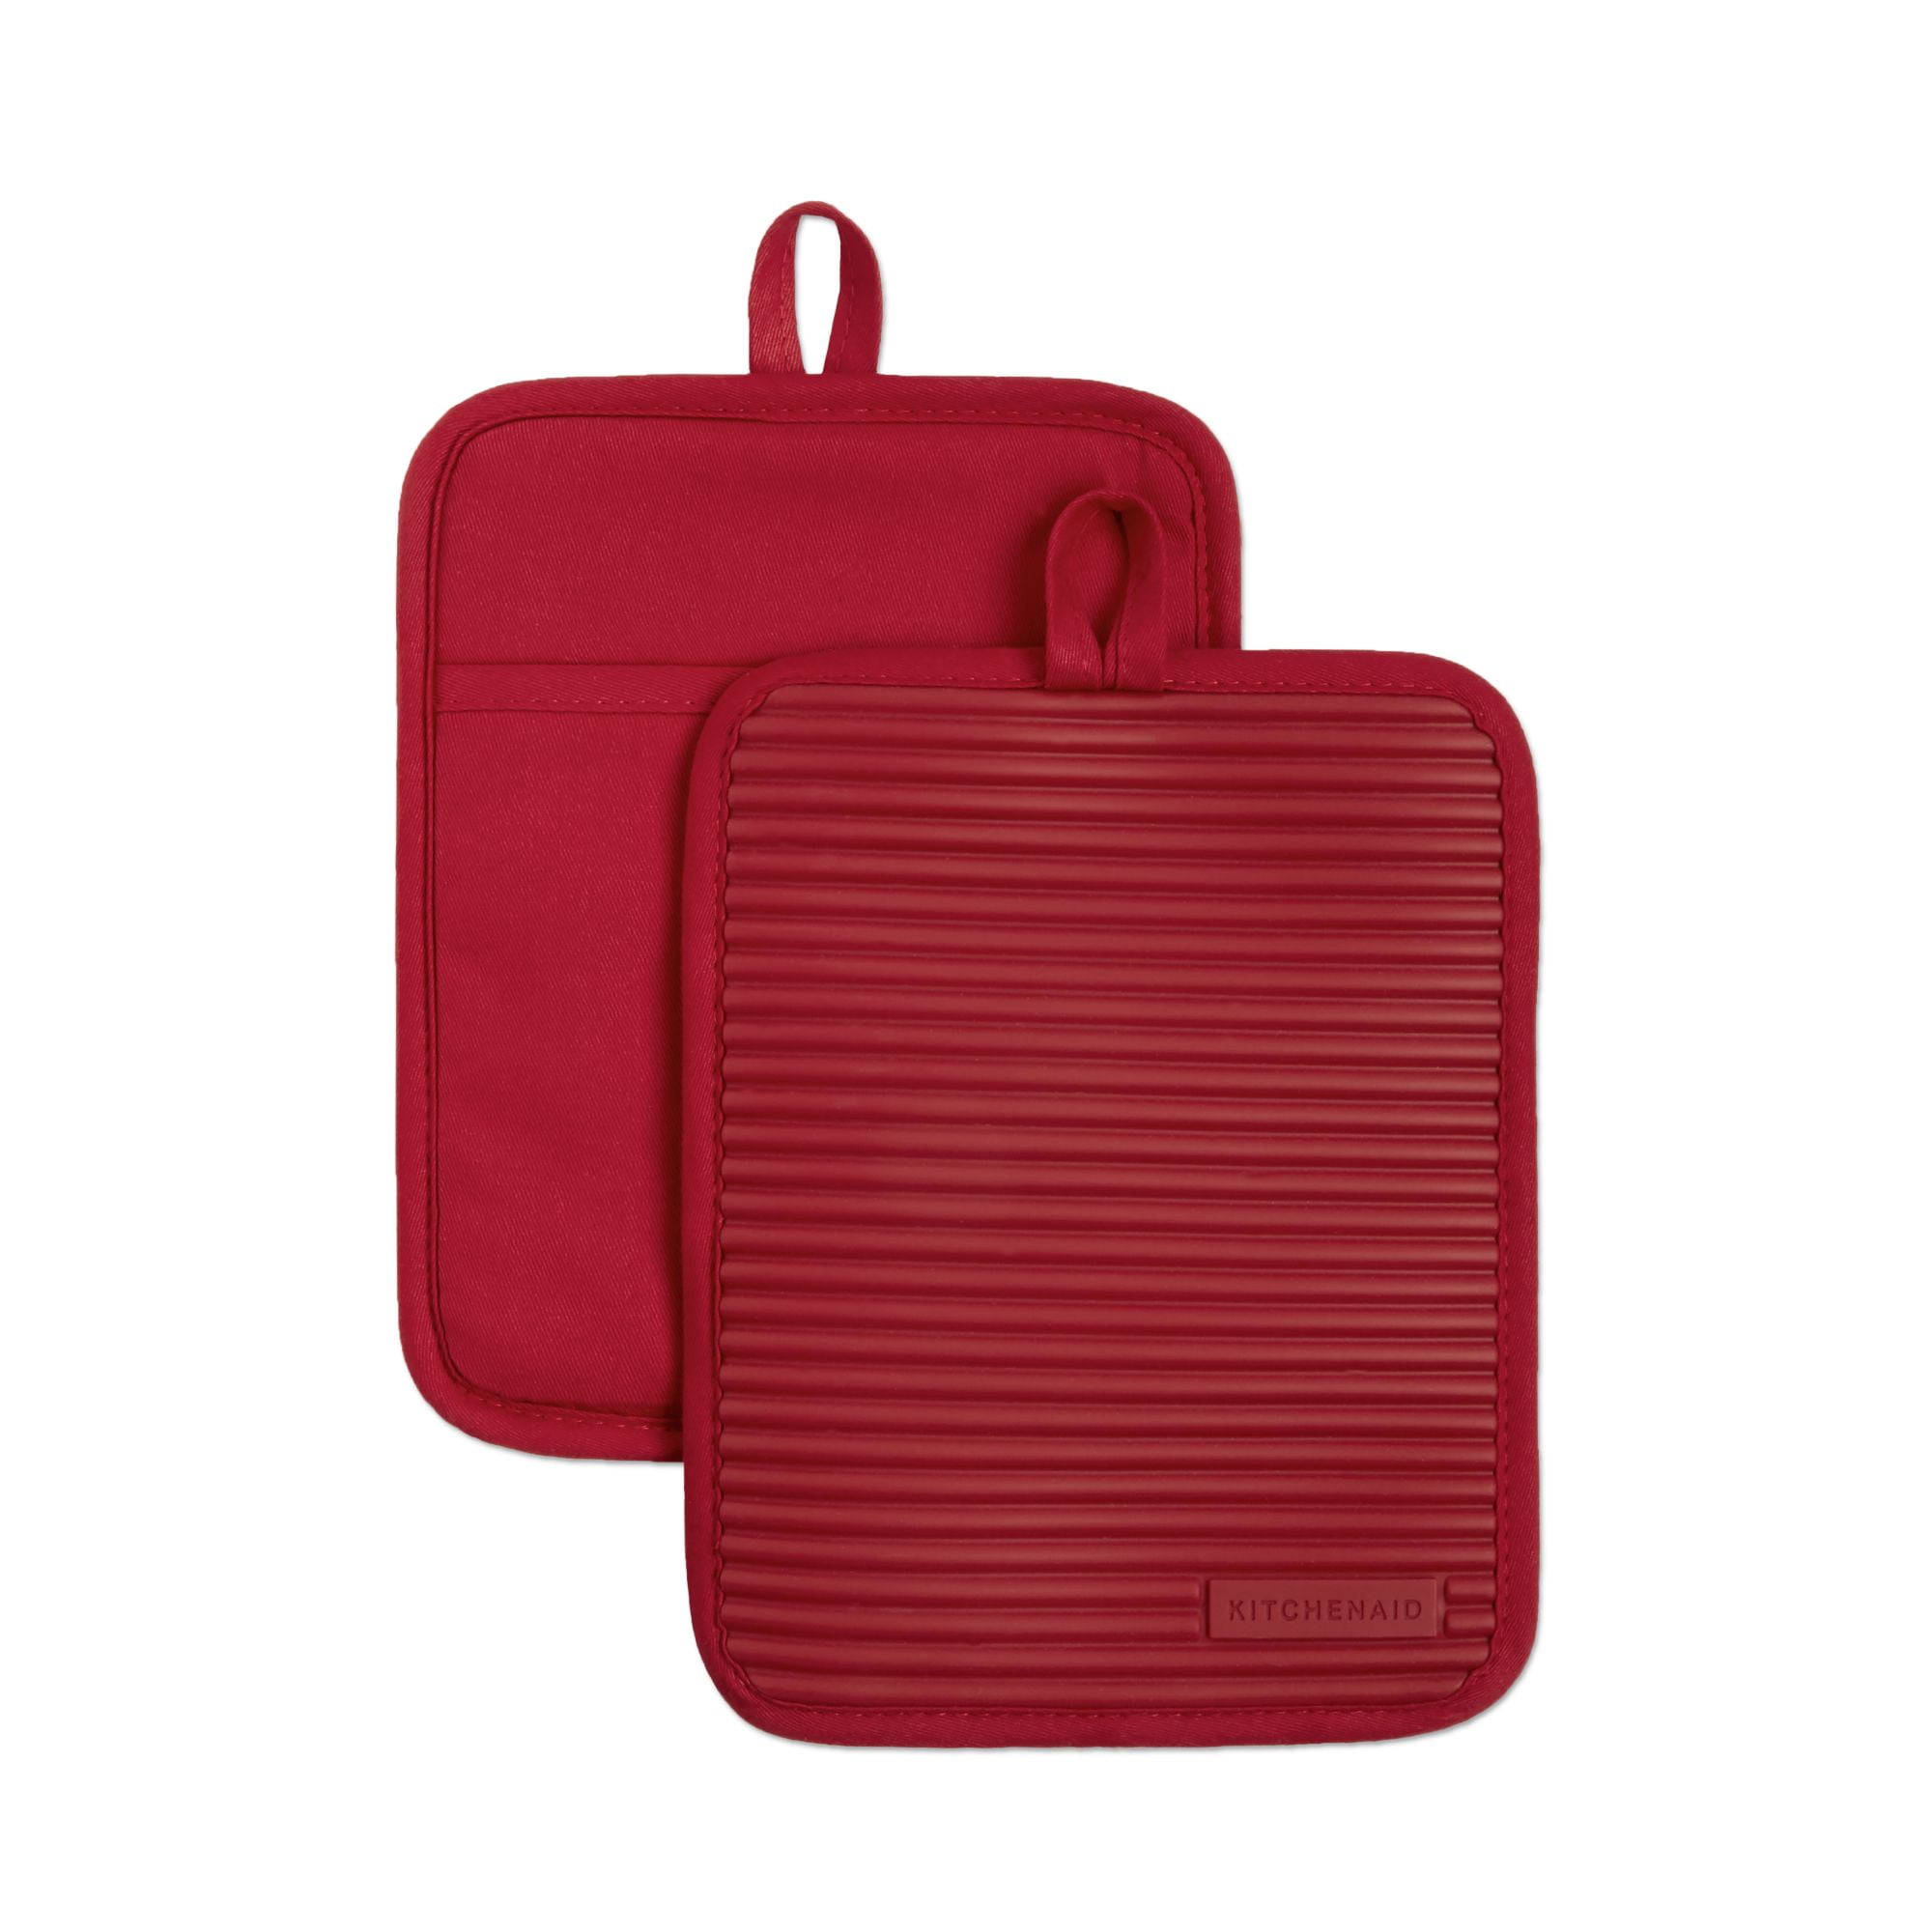 KitchenAid Beacon Pot Holder Set - 2 Pack - Red / Dark Red, 7 x 10 in -  Fry's Food Stores